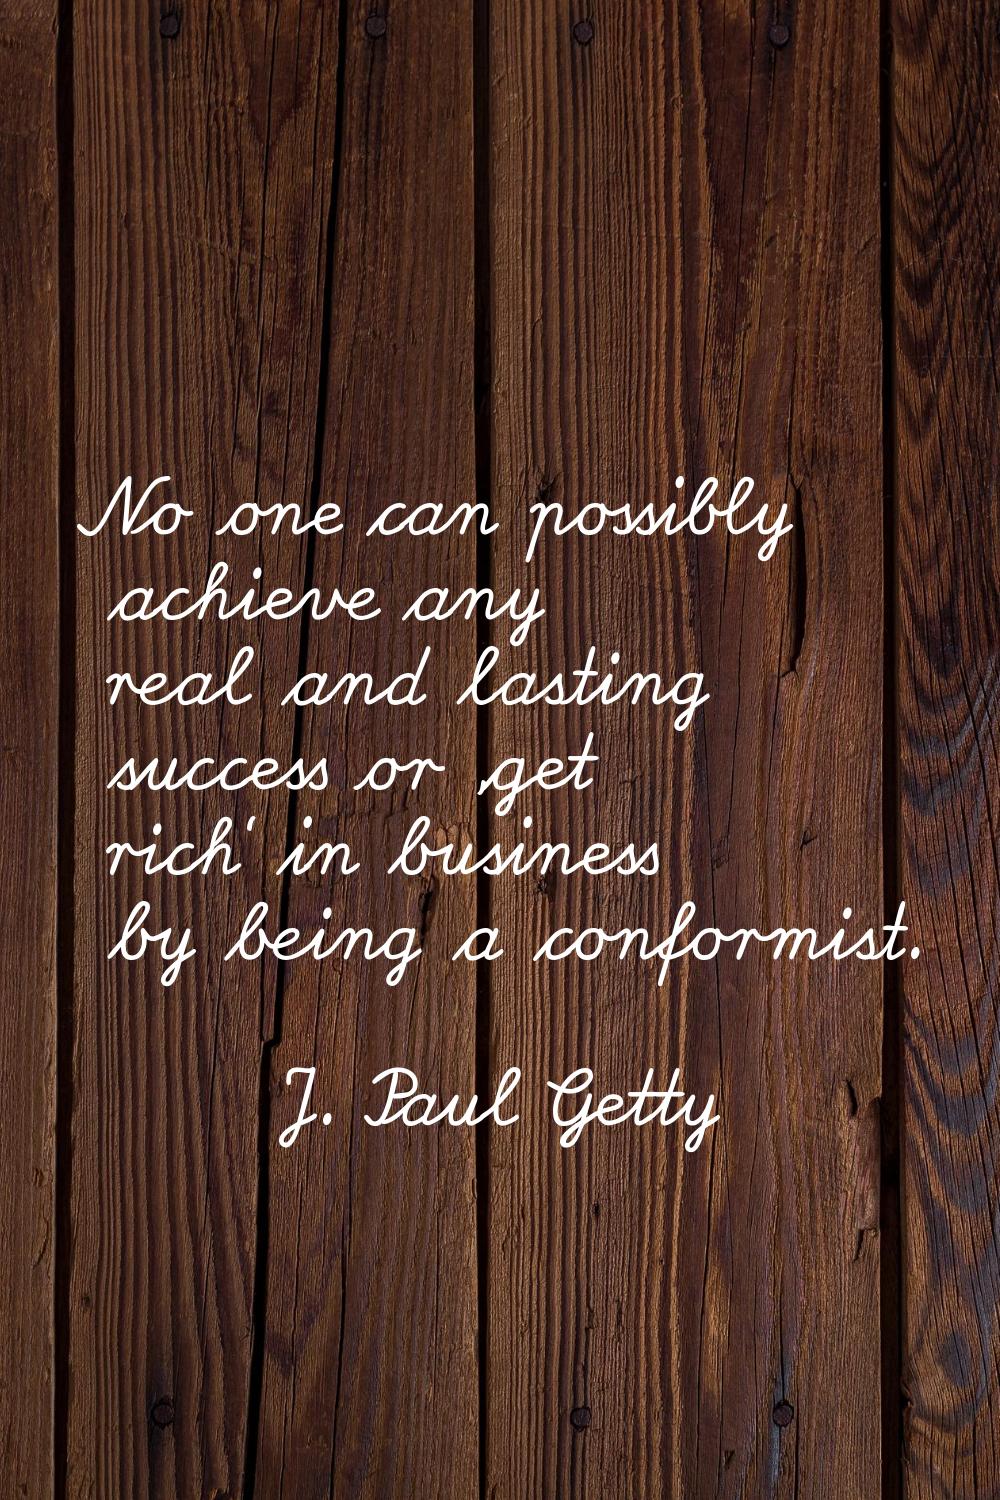 No one can possibly achieve any real and lasting success or 'get rich' in business by being a confo